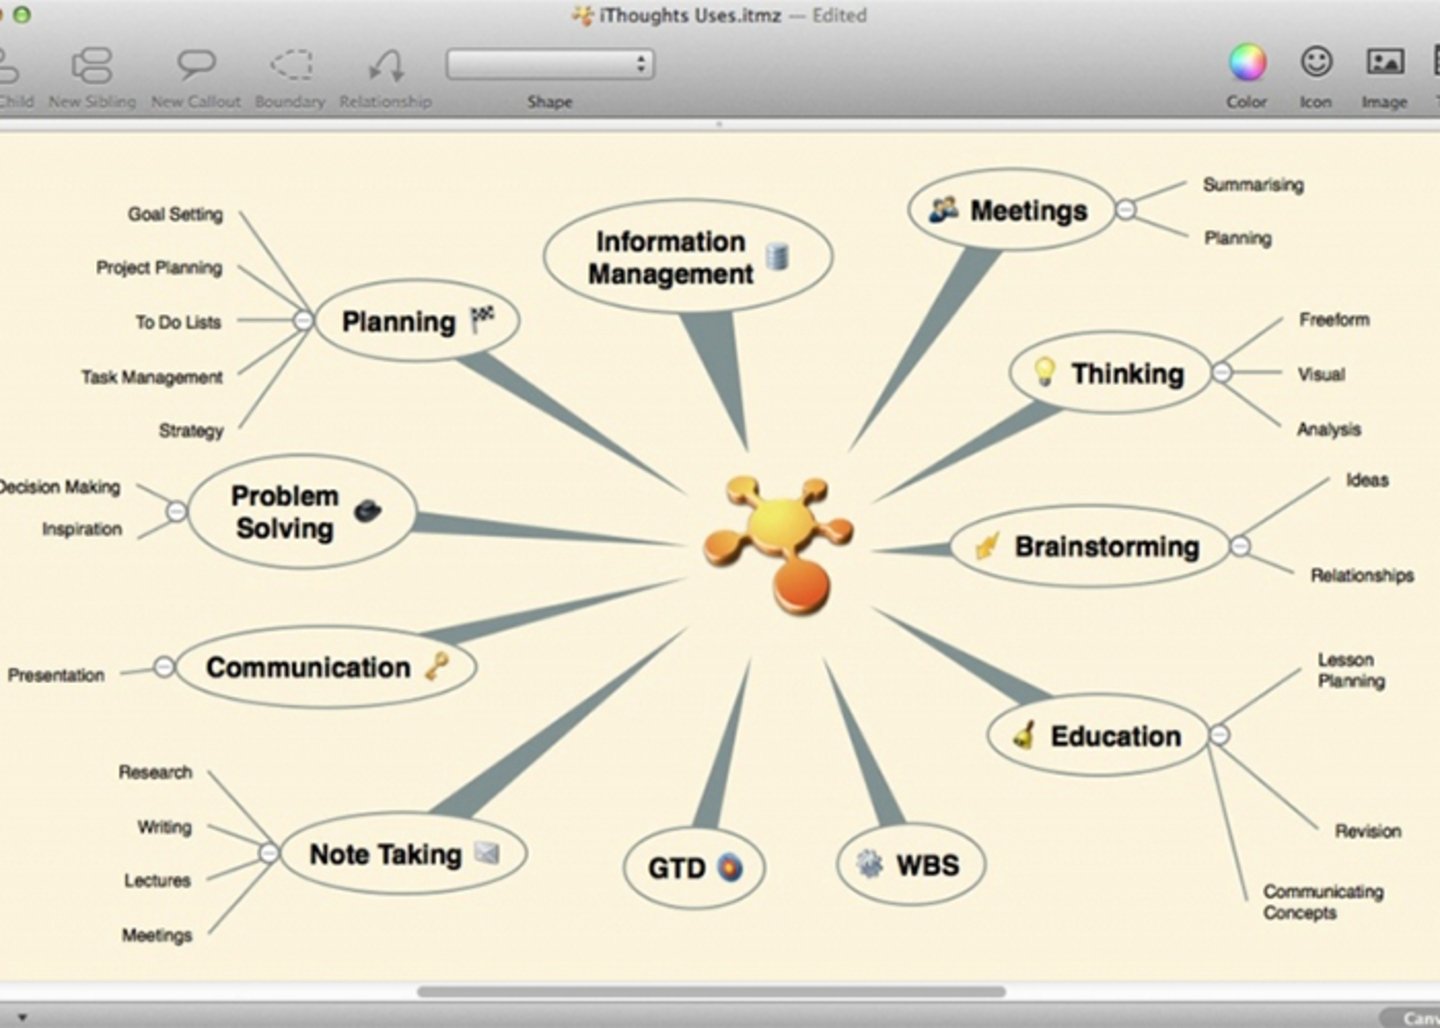 Aprende a visualizar tus ideas con iThoughts - Mind Map